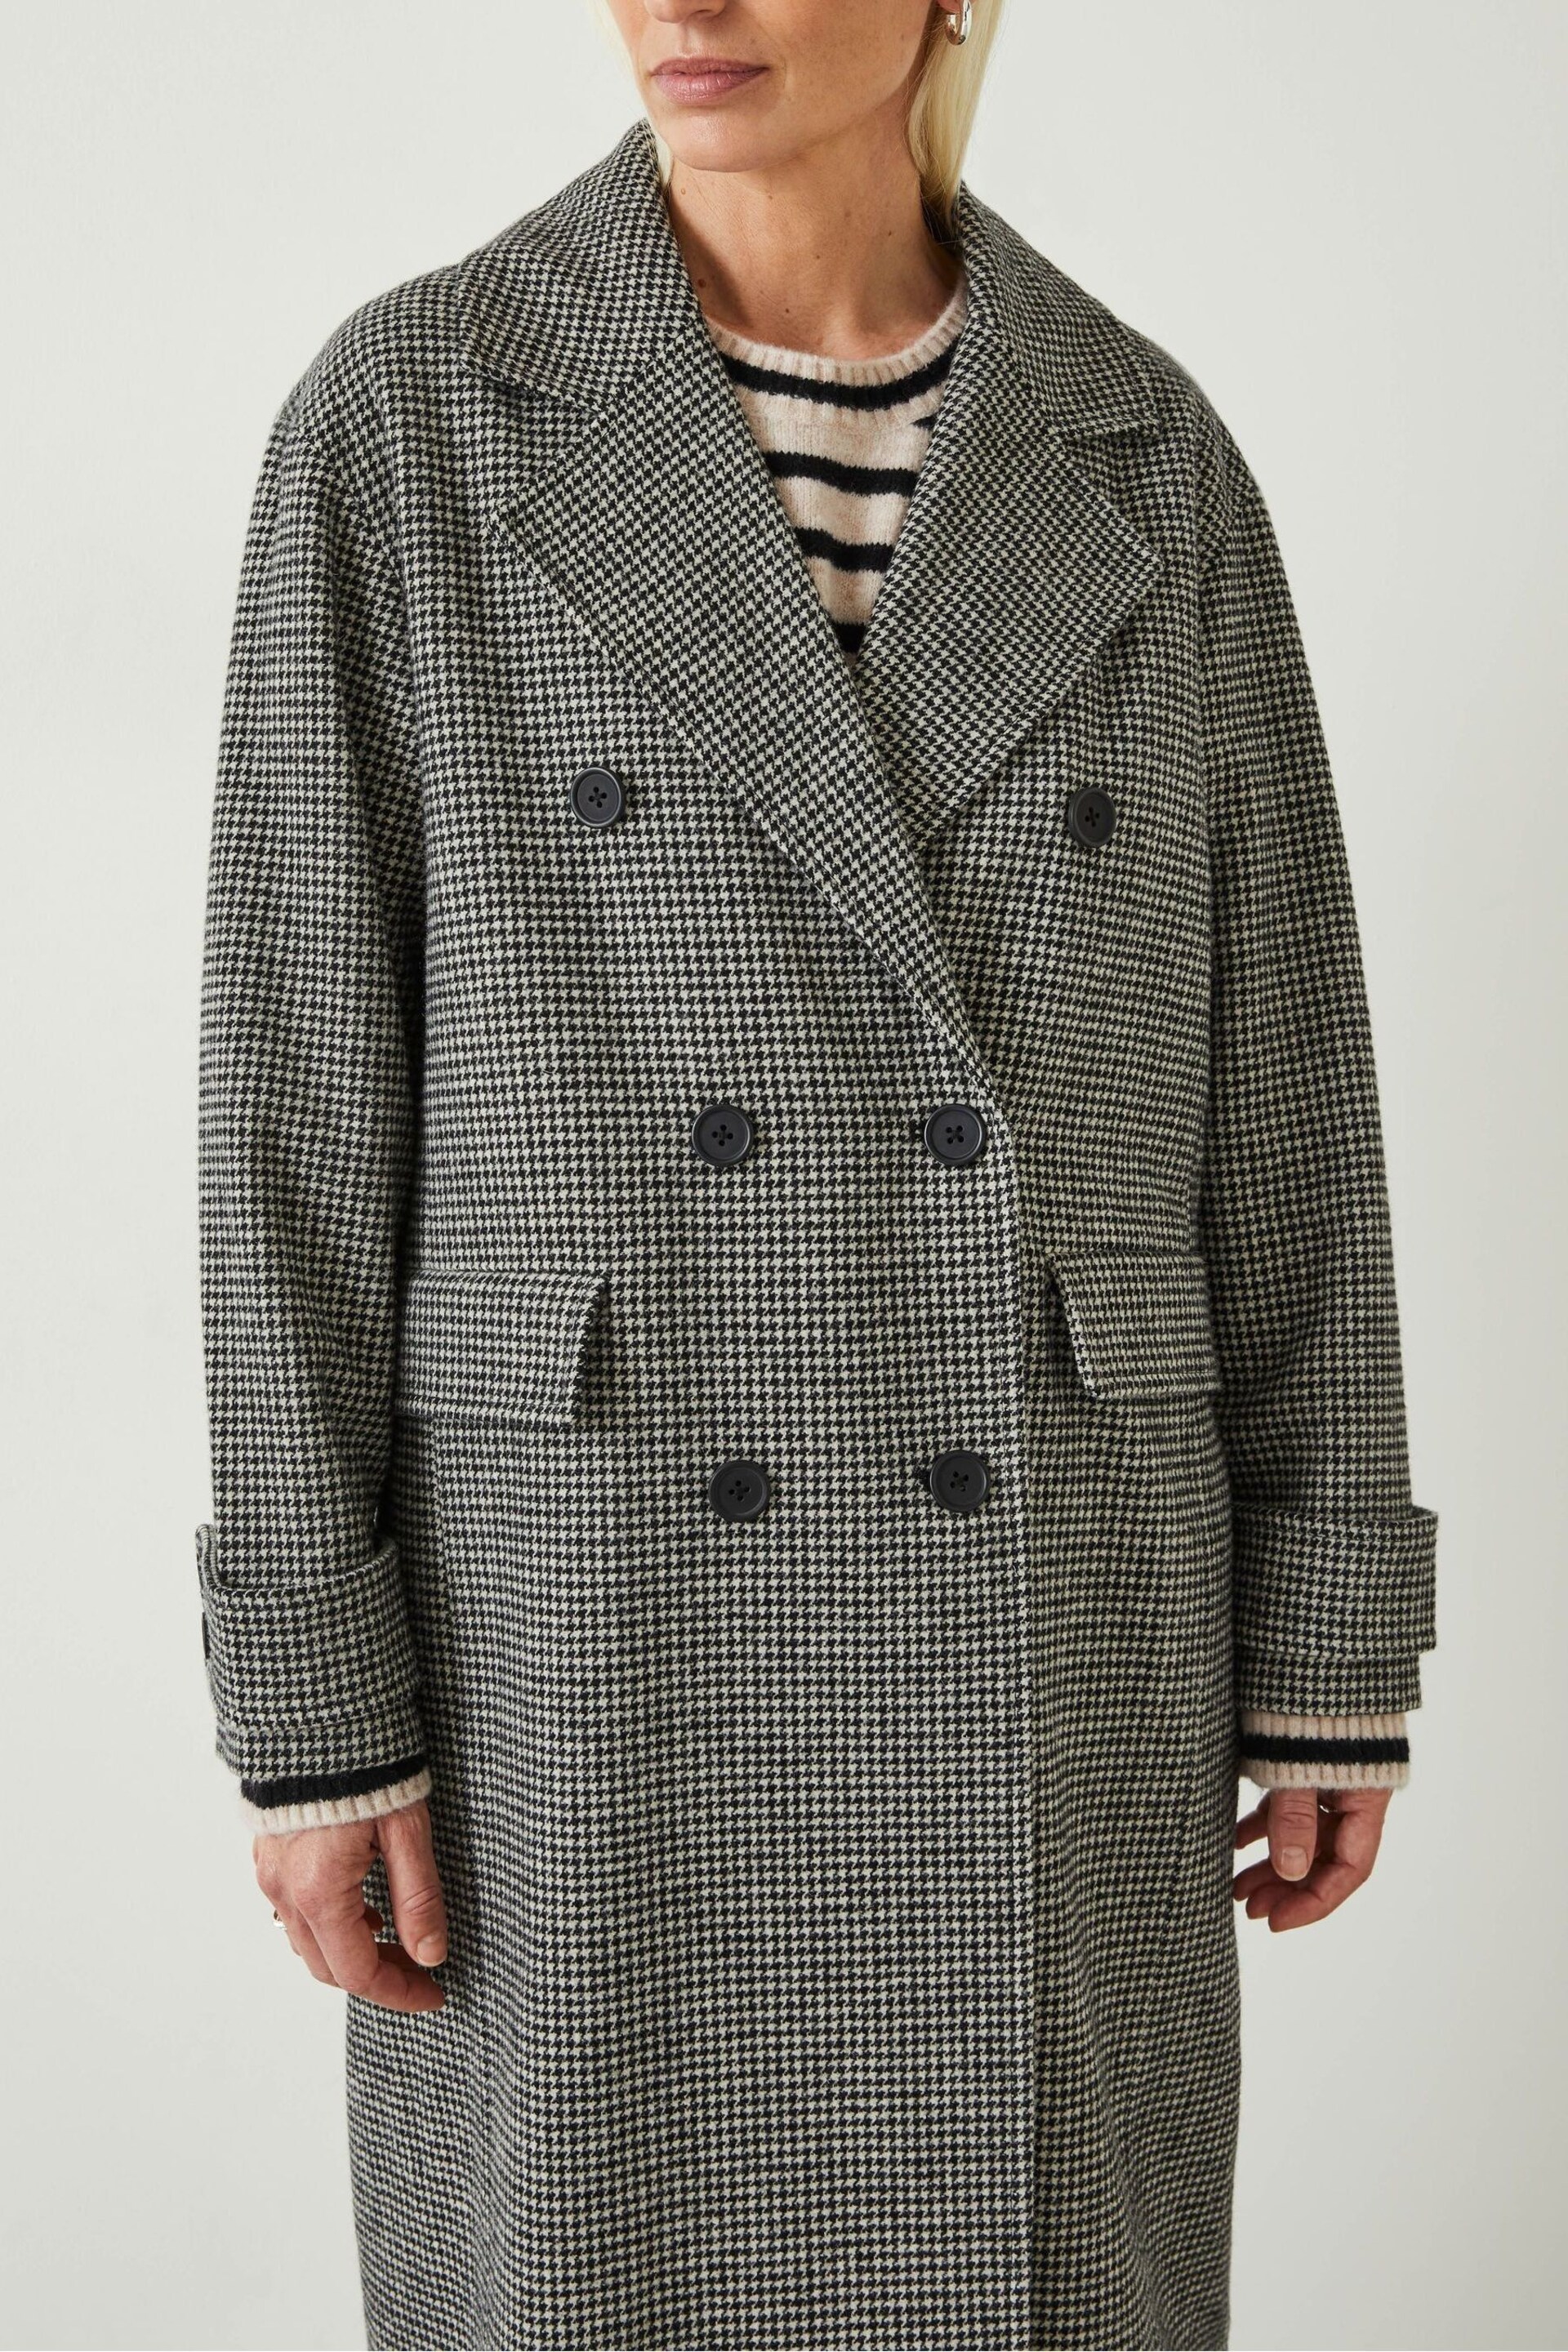 Hush Black Rose Check Double Breasted Coat - Image 5 of 6